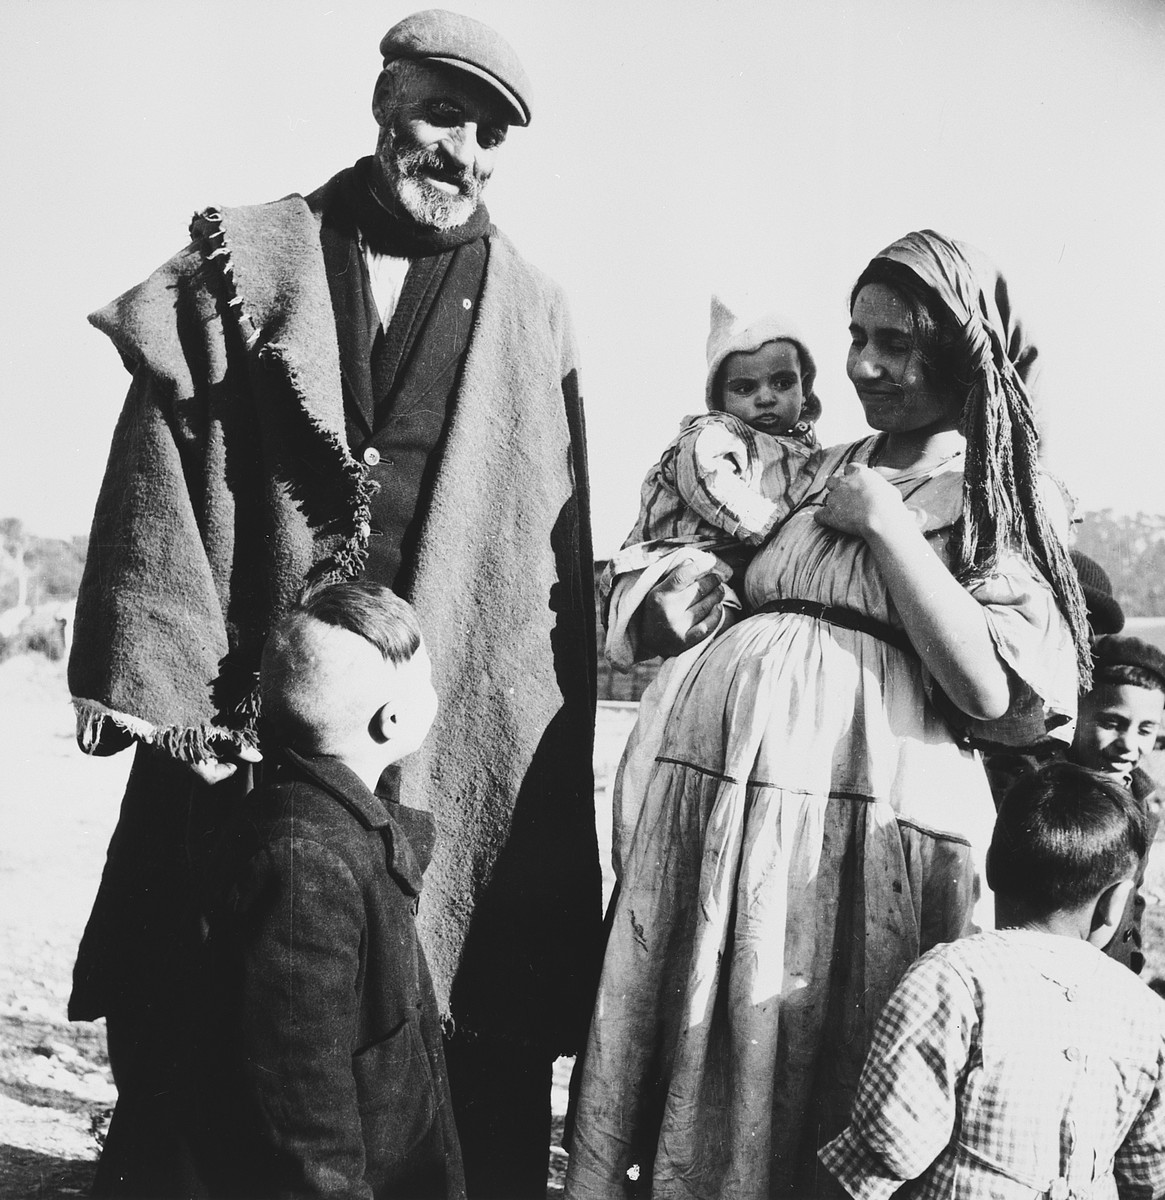 A Morrocan-Jewish family gathers together in the Los Arenas camp while waiting to immigrate to Palestine.